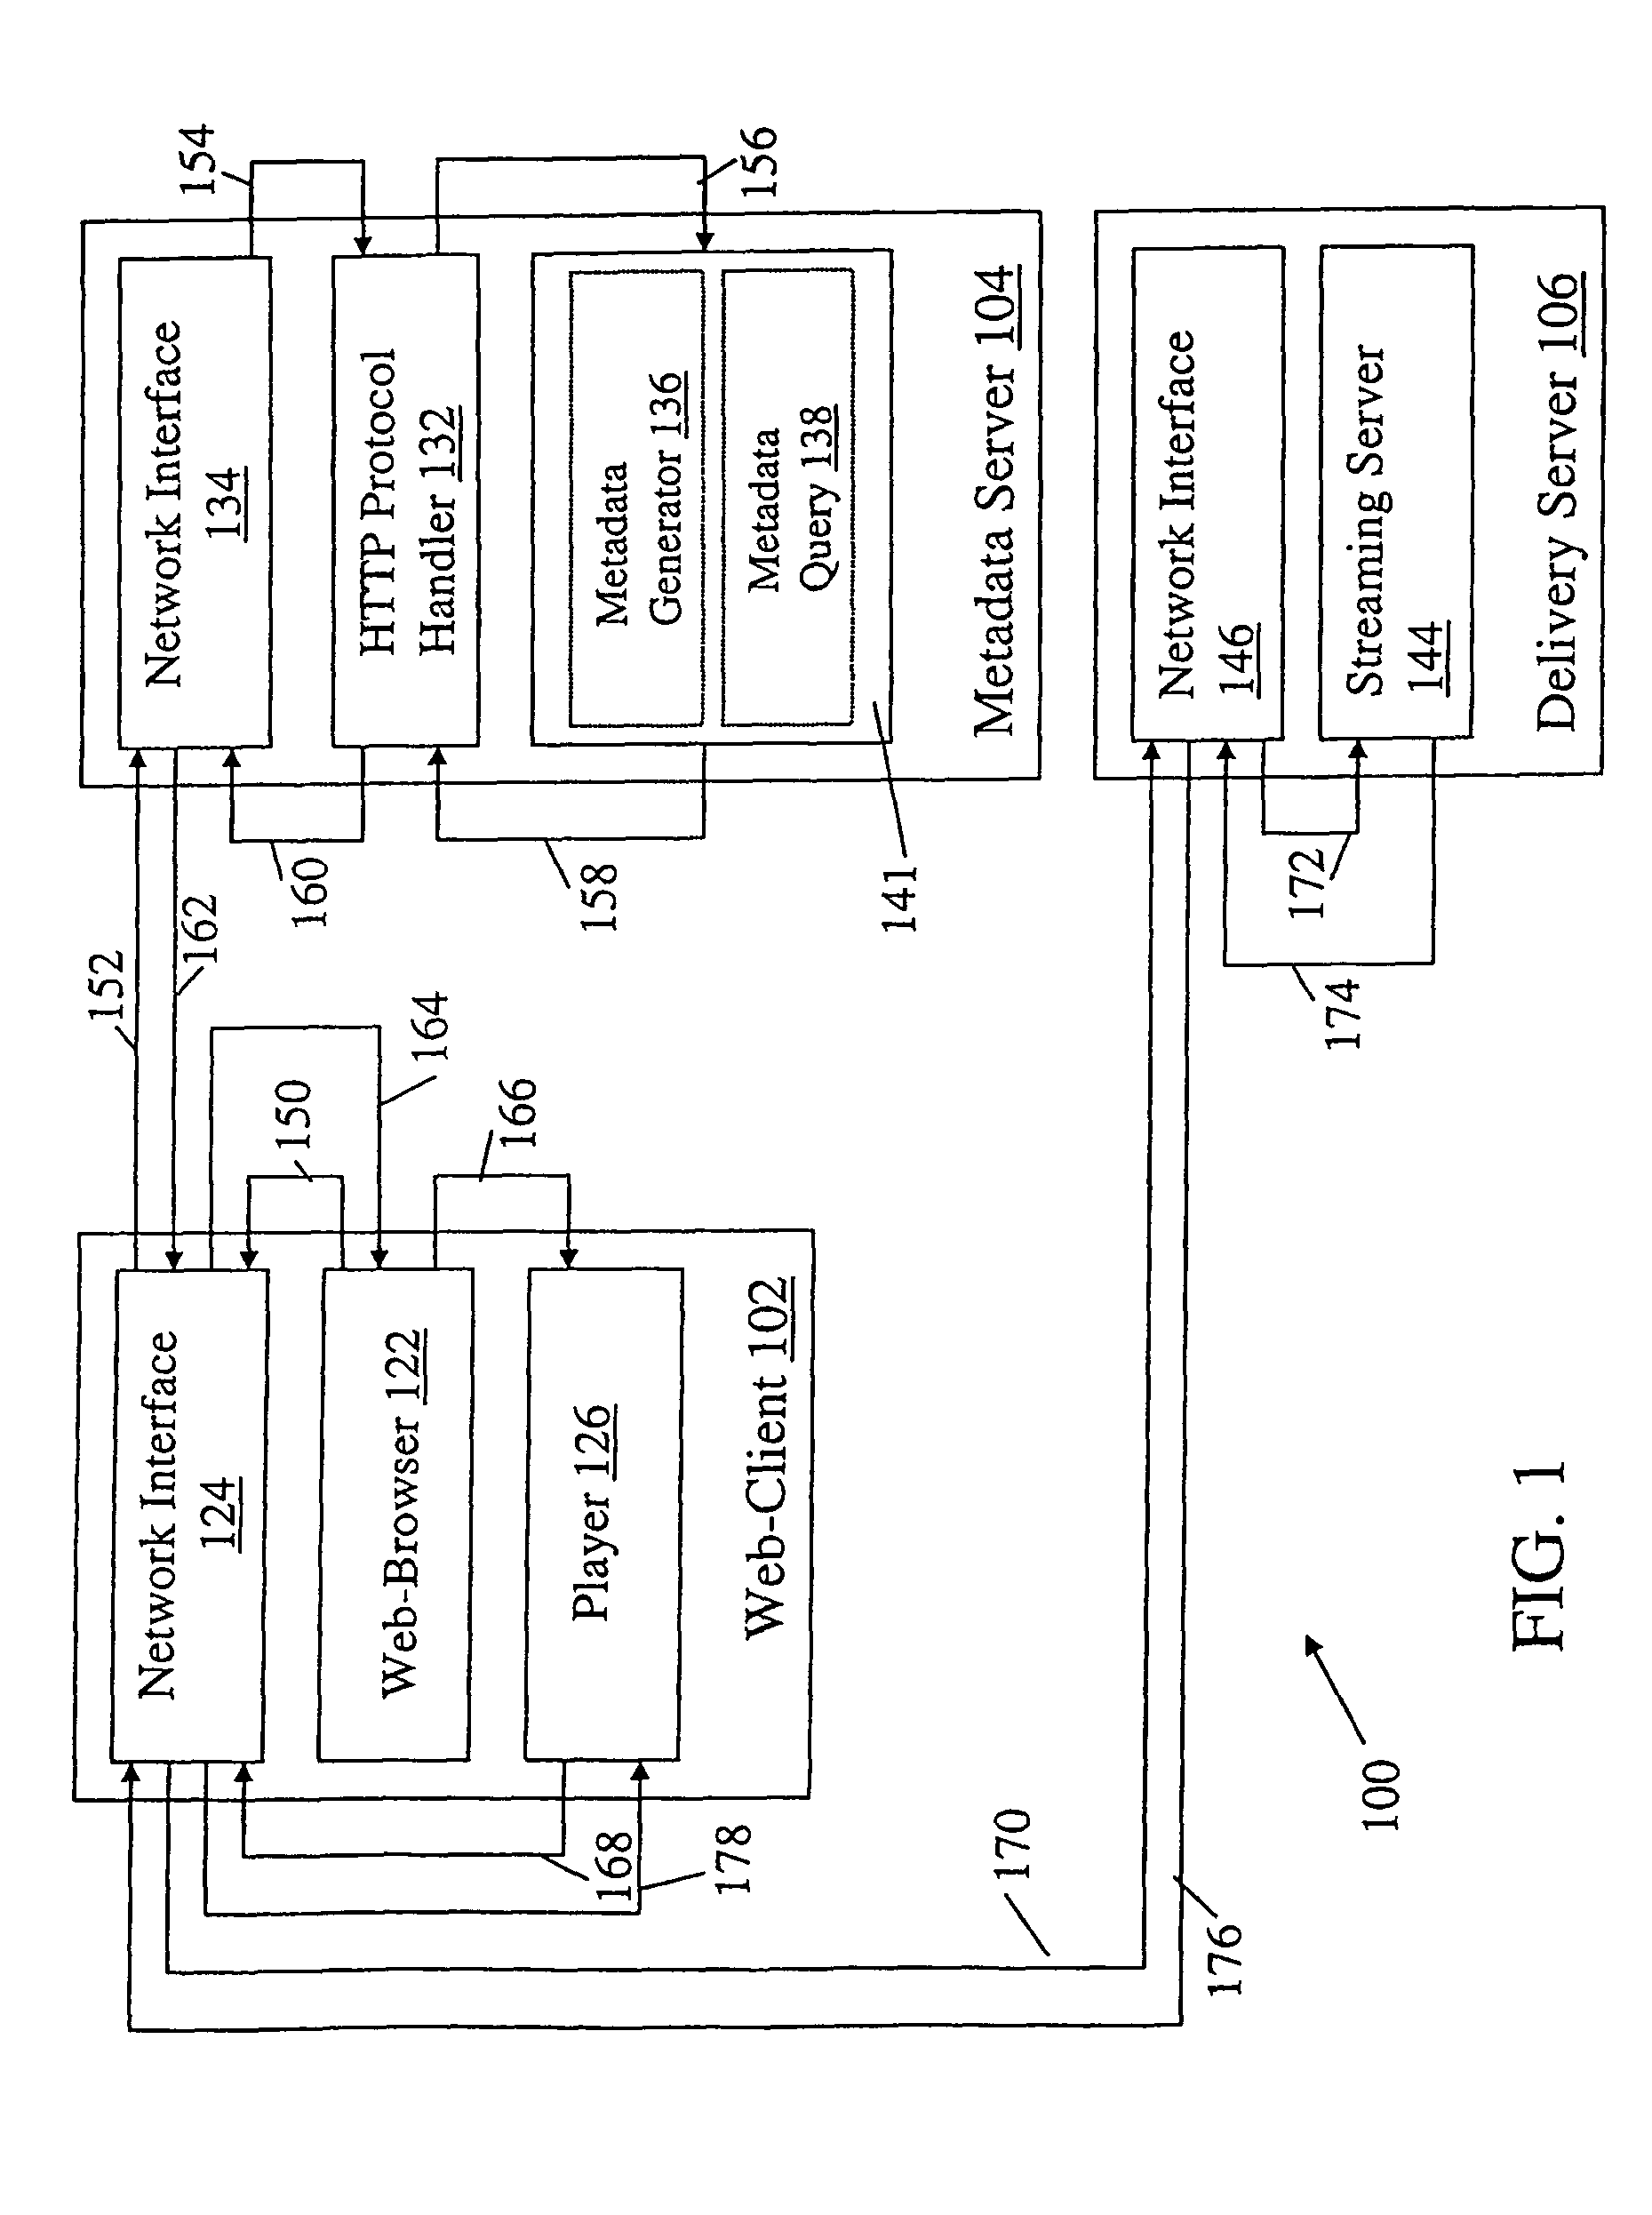 Method and device for streaming a media file over a distributed information system